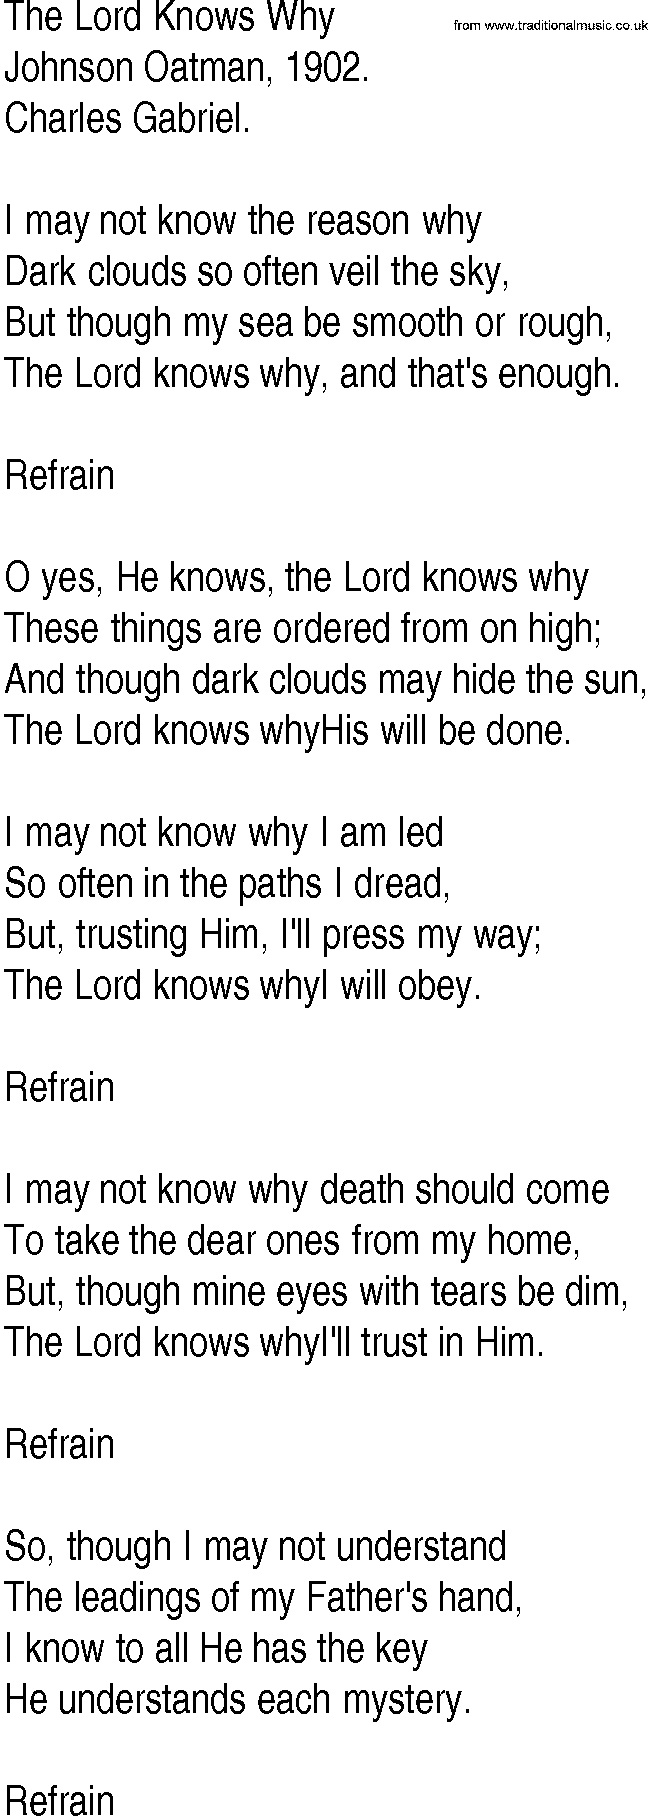 Hymn and Gospel Song: The Lord Knows Why by Johnson Oatman lyrics